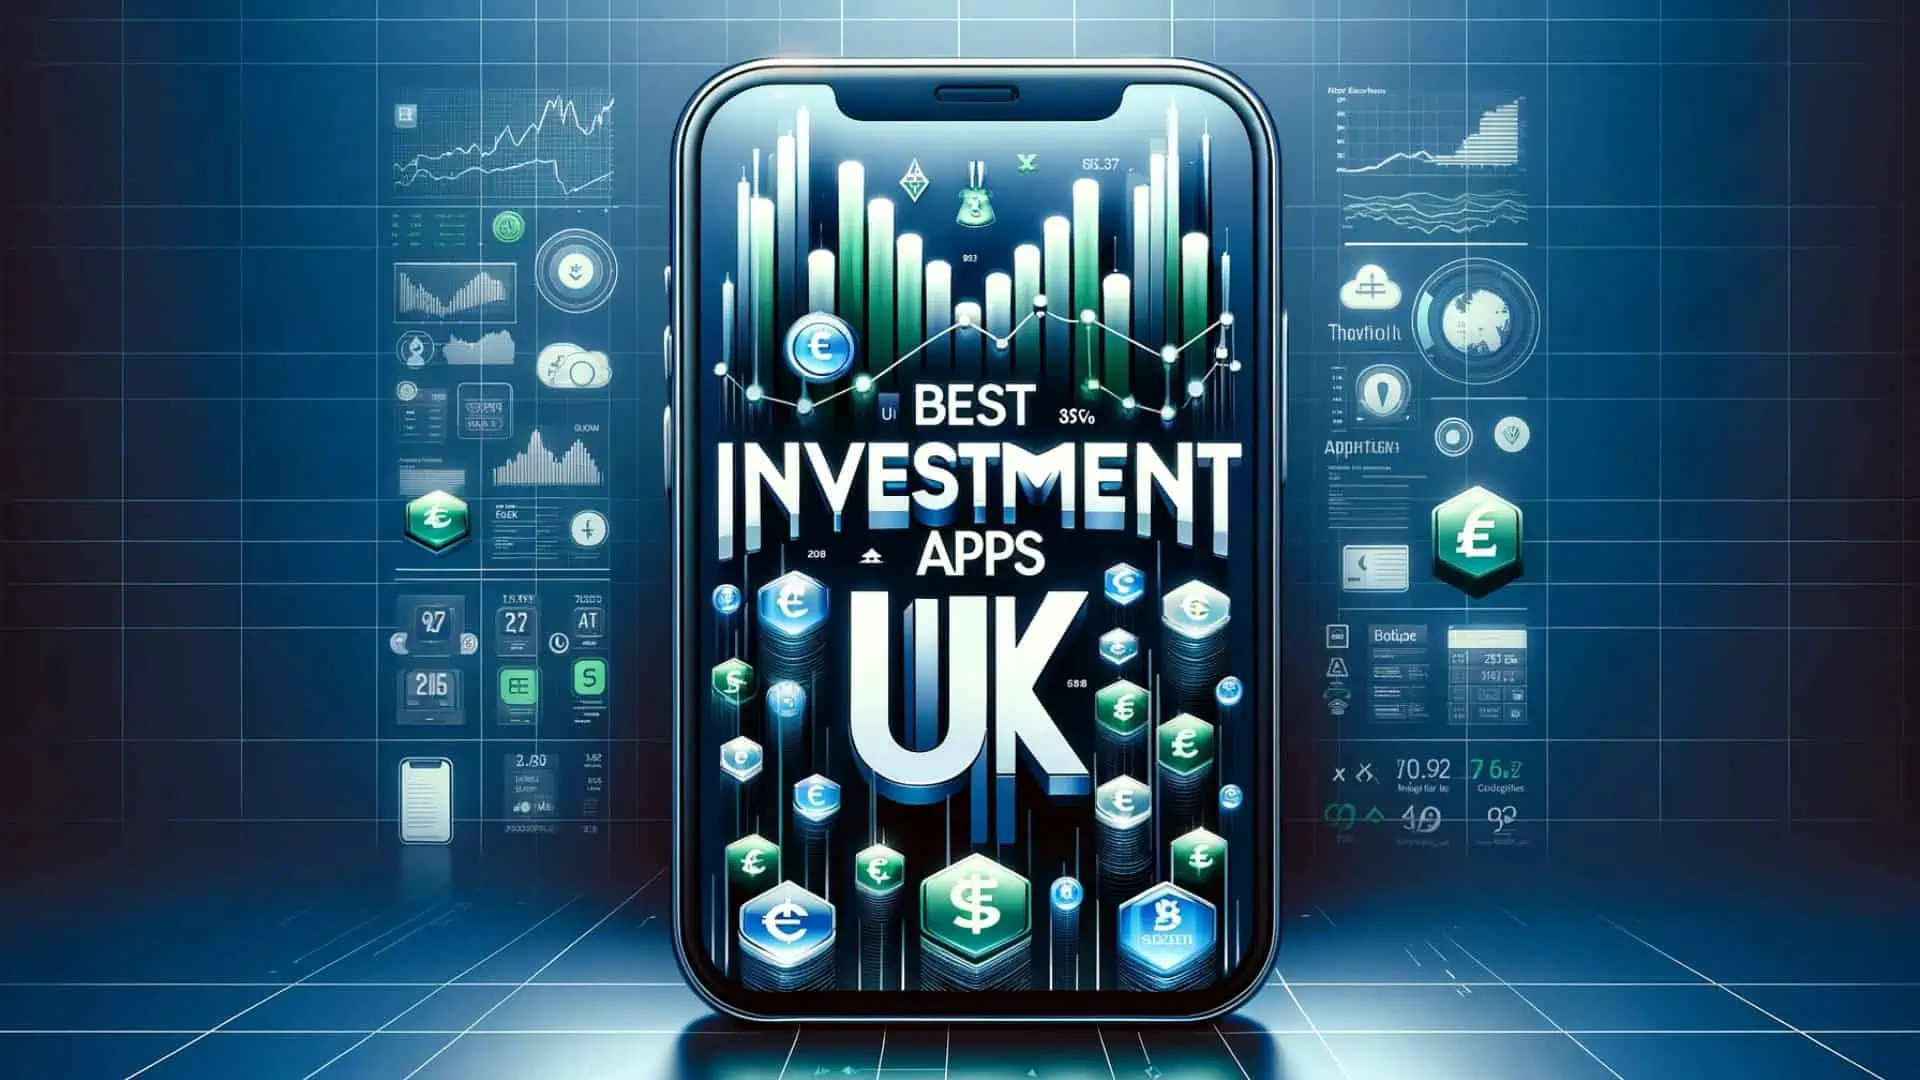 Best Investment Apps UK for Beginner and Pros